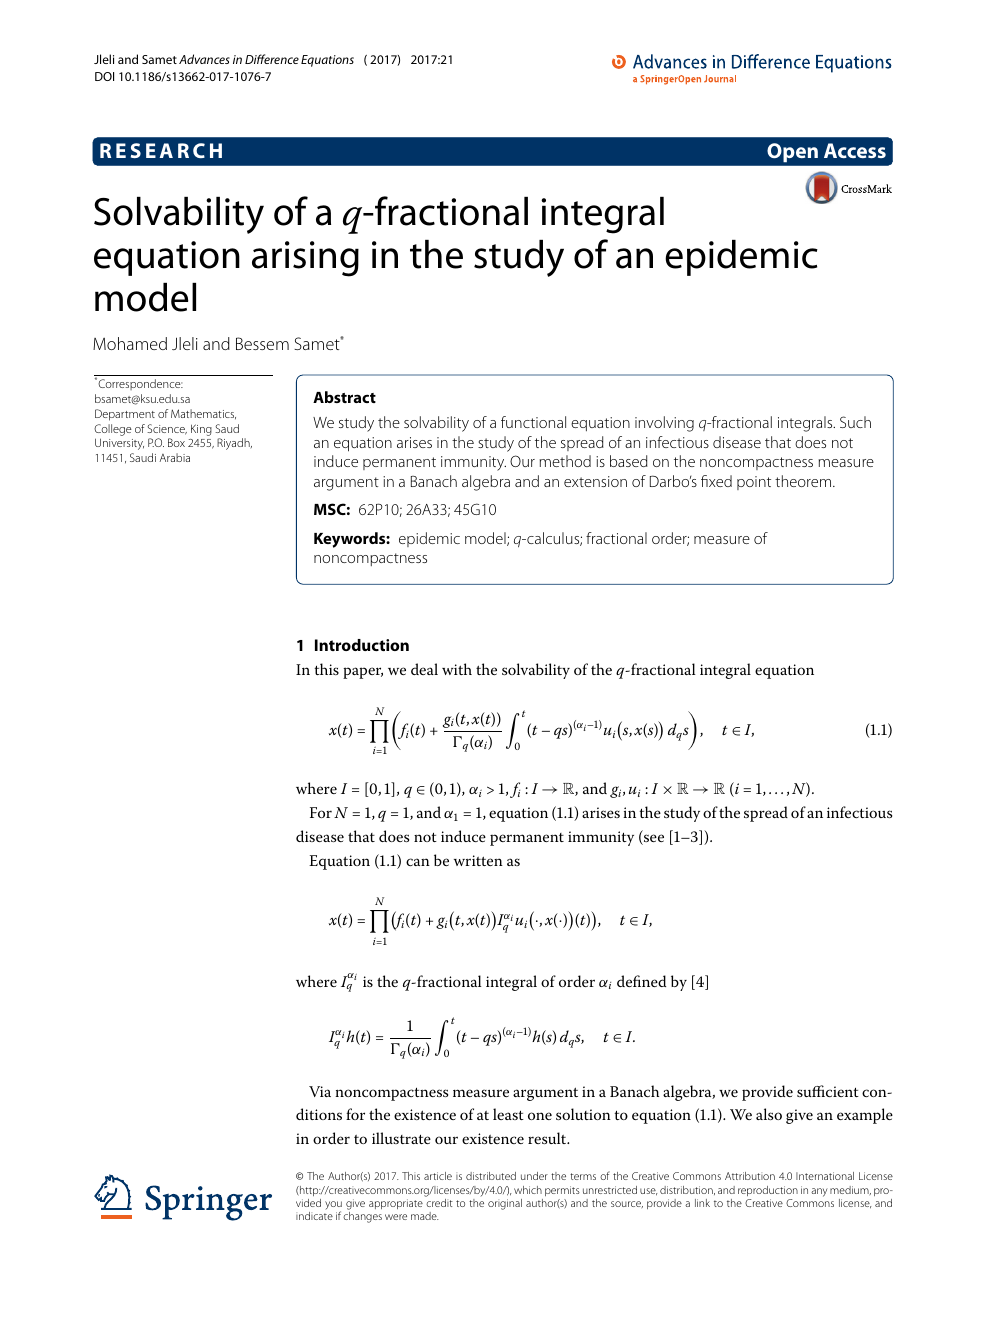 Solvability Of A Q Fractional Integral Equation Arising In The Study Of An Epidemic Model Topic Of Research Paper In Mathematics Download Scholarly Article Pdf And Read For Free On Cyberleninka Open